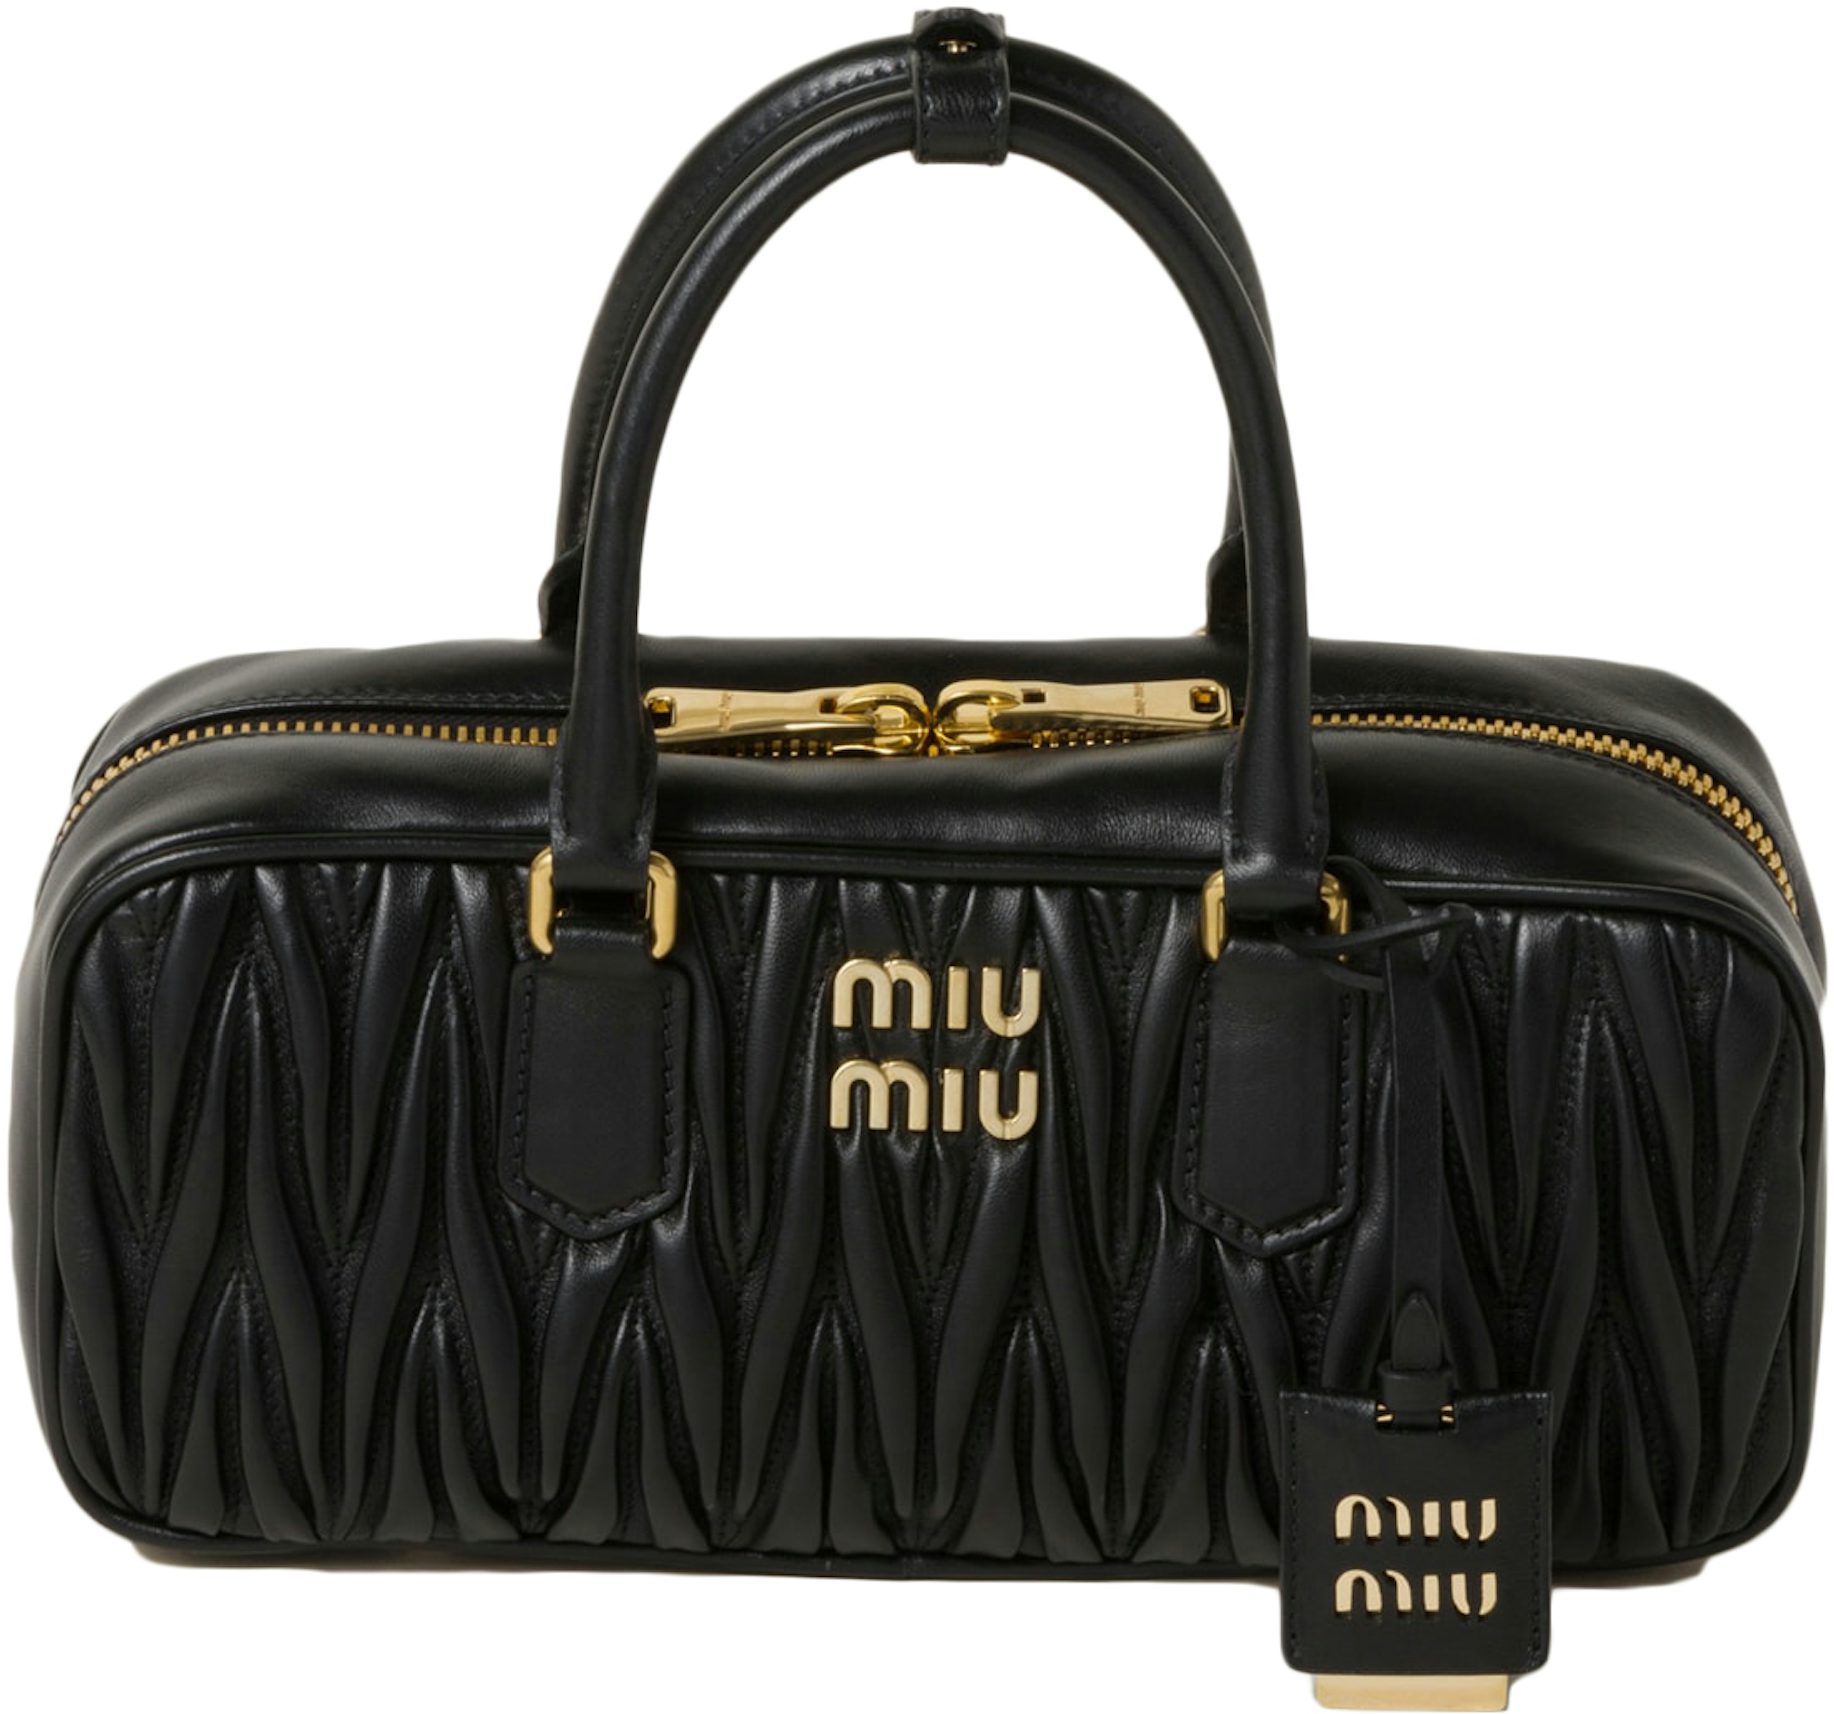 Miu Miu Shoulder Bags Outlet Genuine - Nappa Leather White